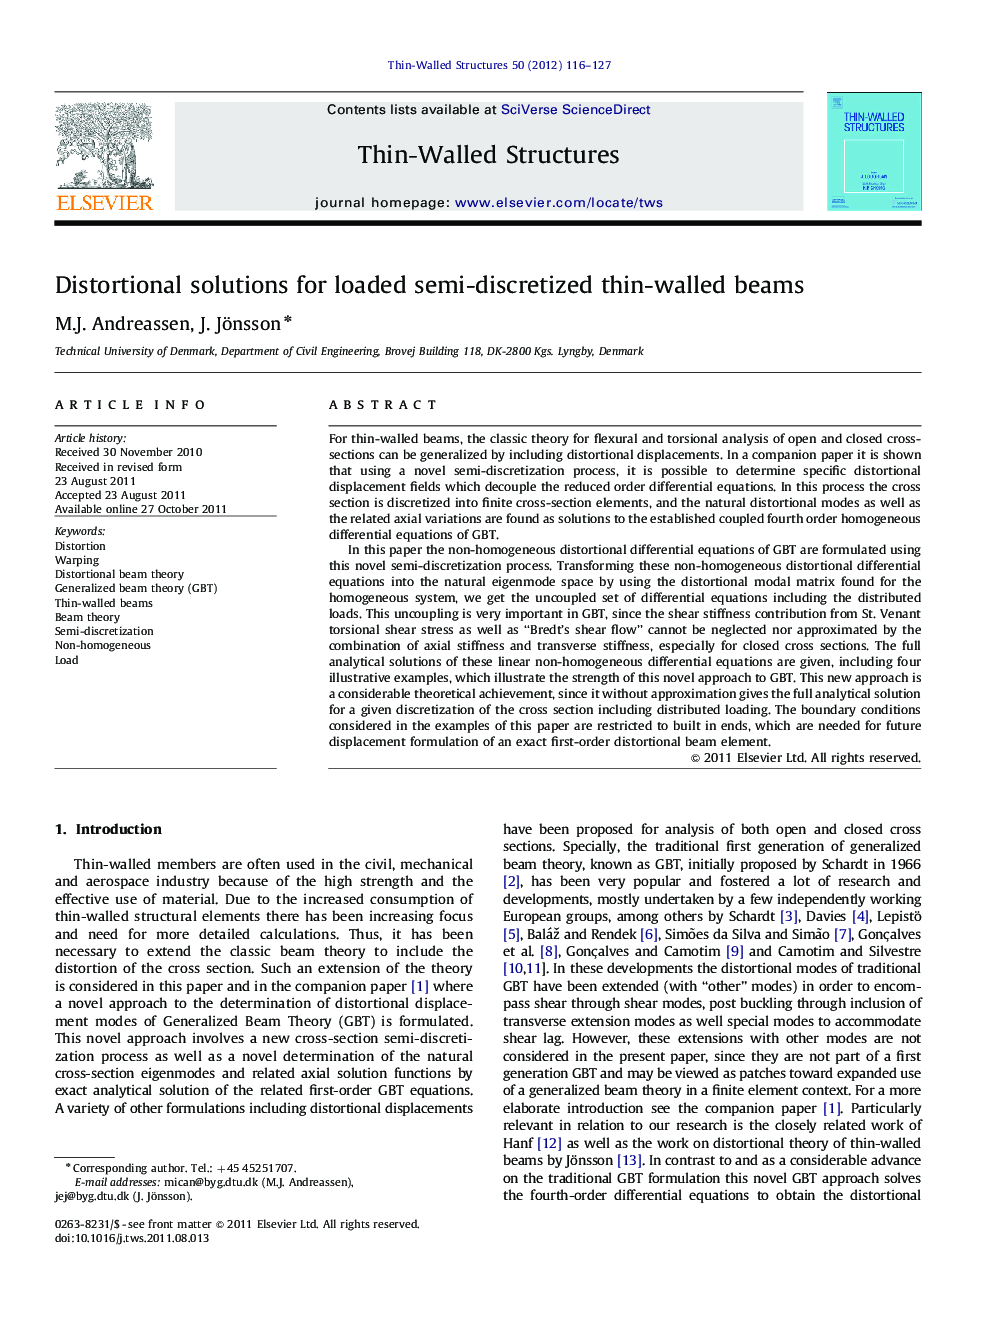 Distortional solutions for loaded semi-discretized thin-walled beams